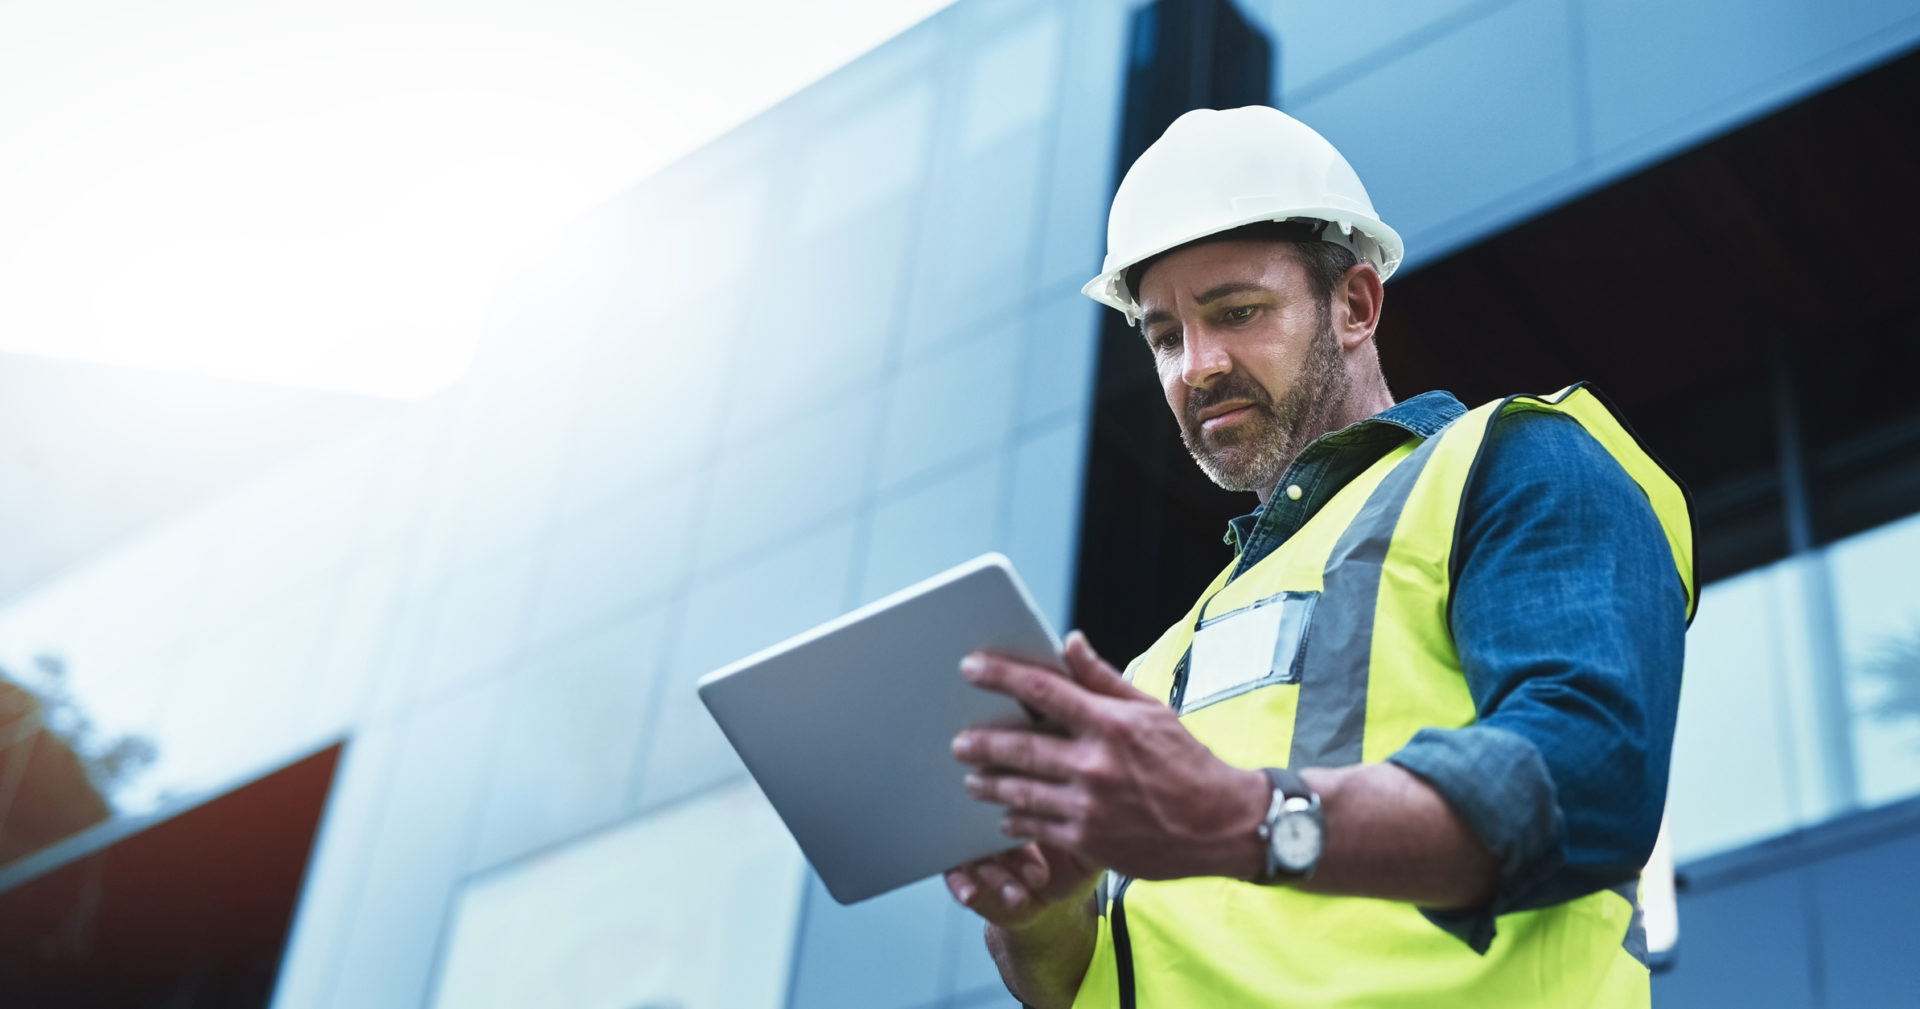 A construction worker using a tablet on site is slowed down by outdated technology.